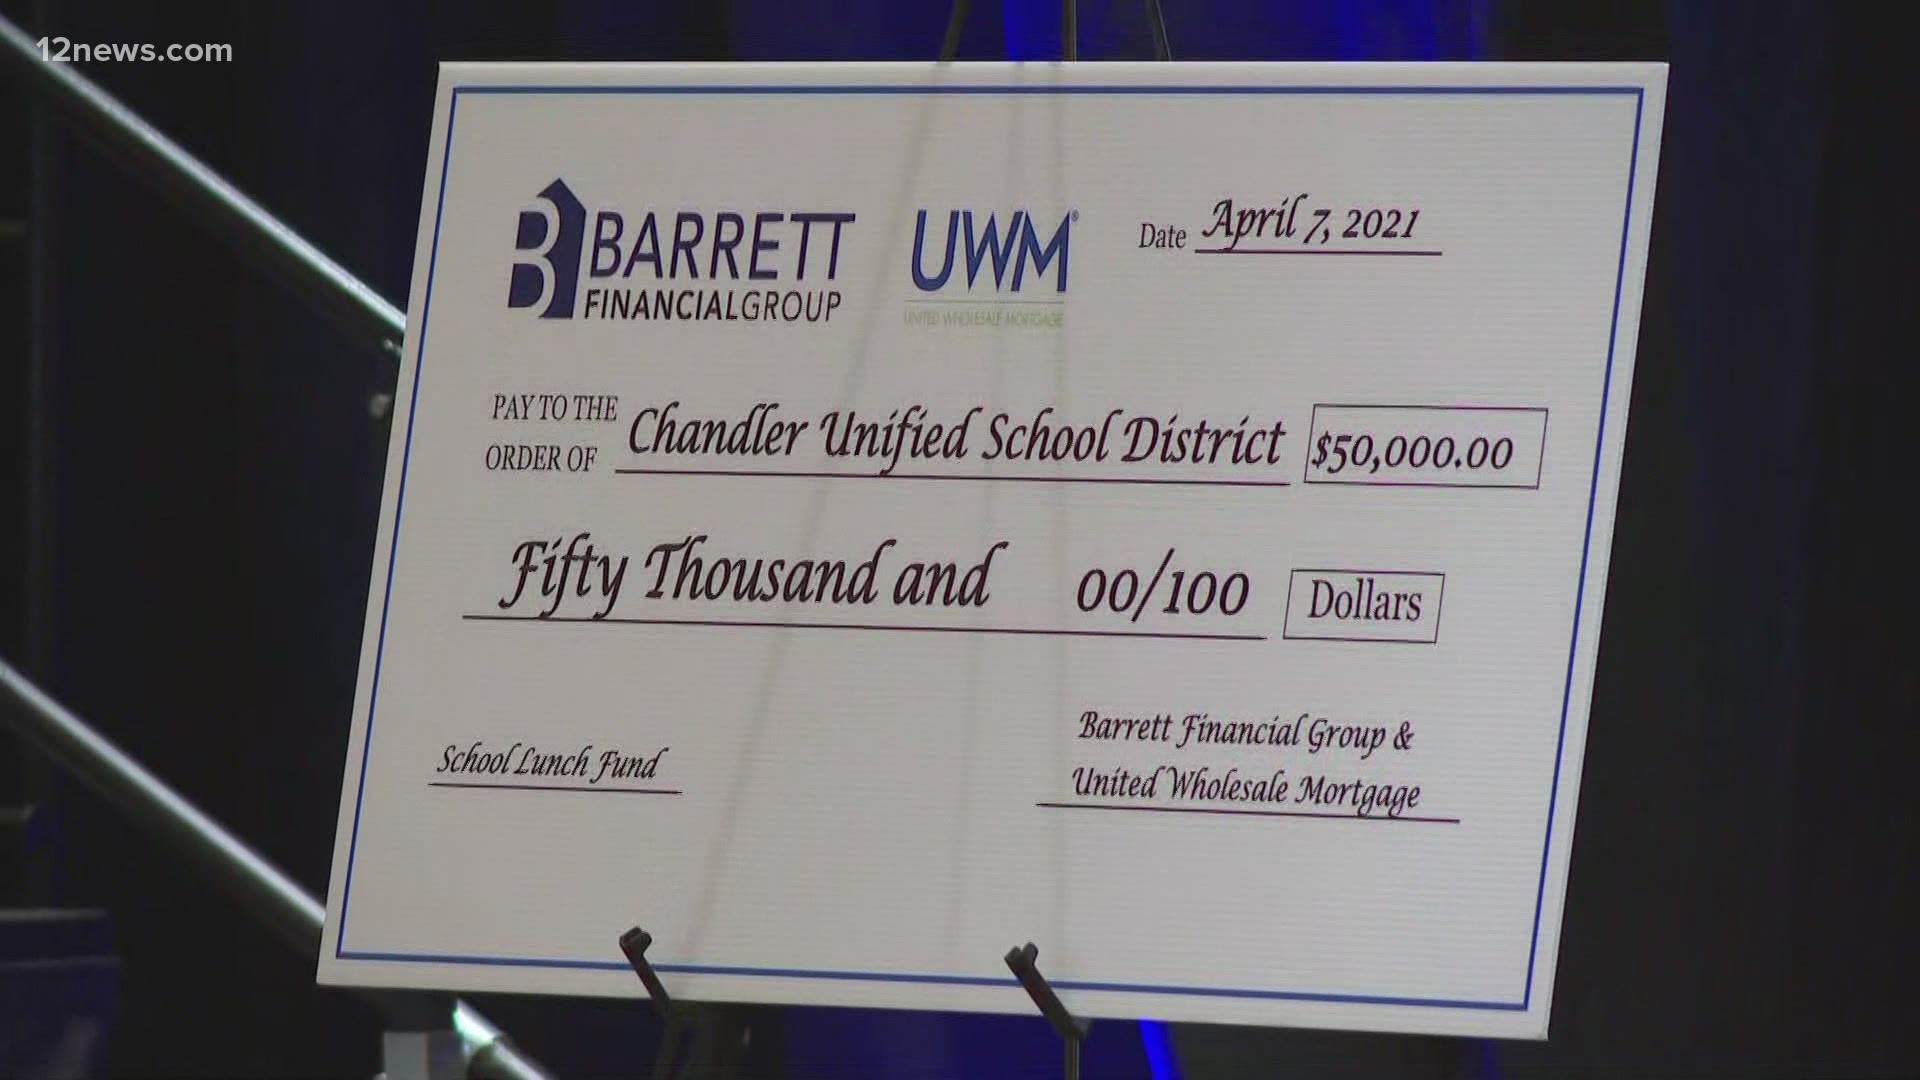 Barret Financial Group donated $50,000 to pay of the Chandler Unified School District's school lunch fund. A similar donation was made by the group last year.